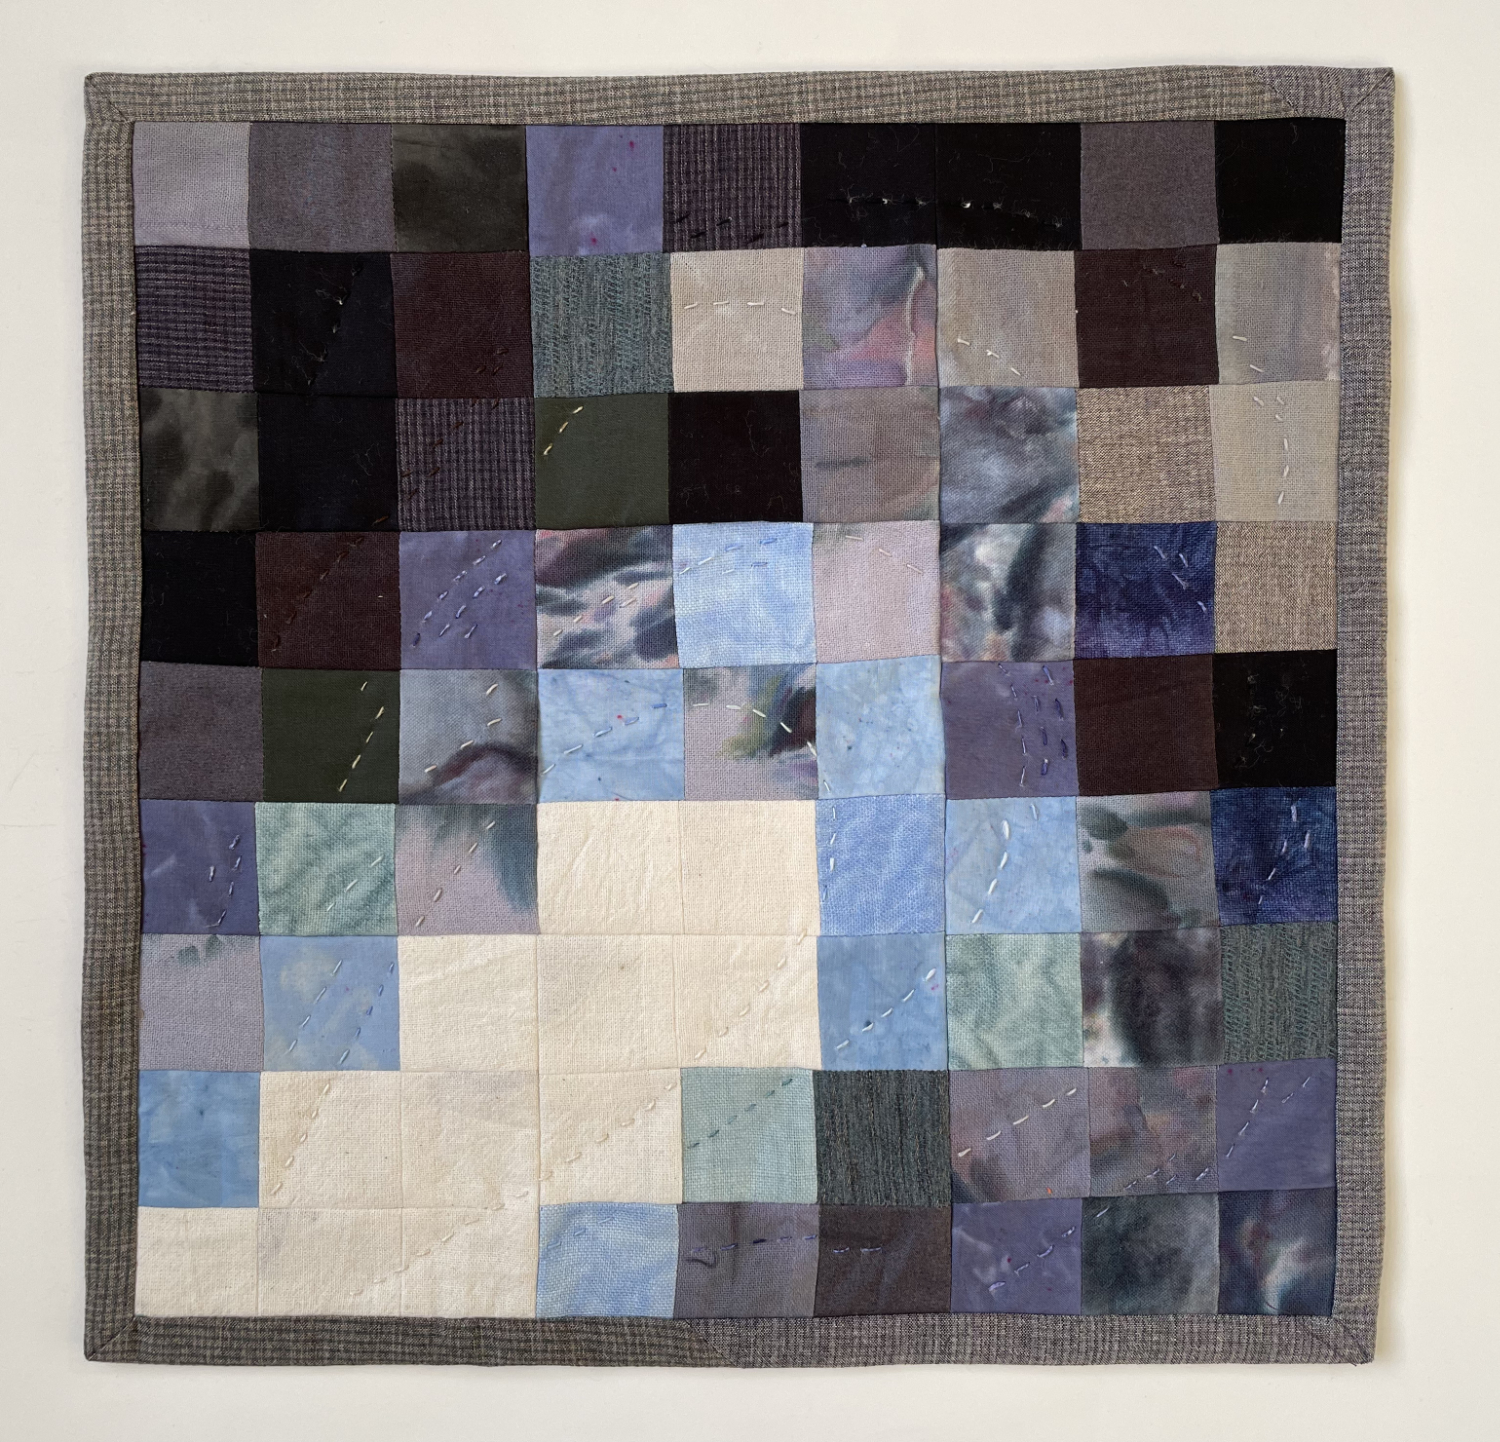 abstract pieced quilt with 9 x 9 squares with light on a diagonal pointing right and mussel shell colors around the edges 